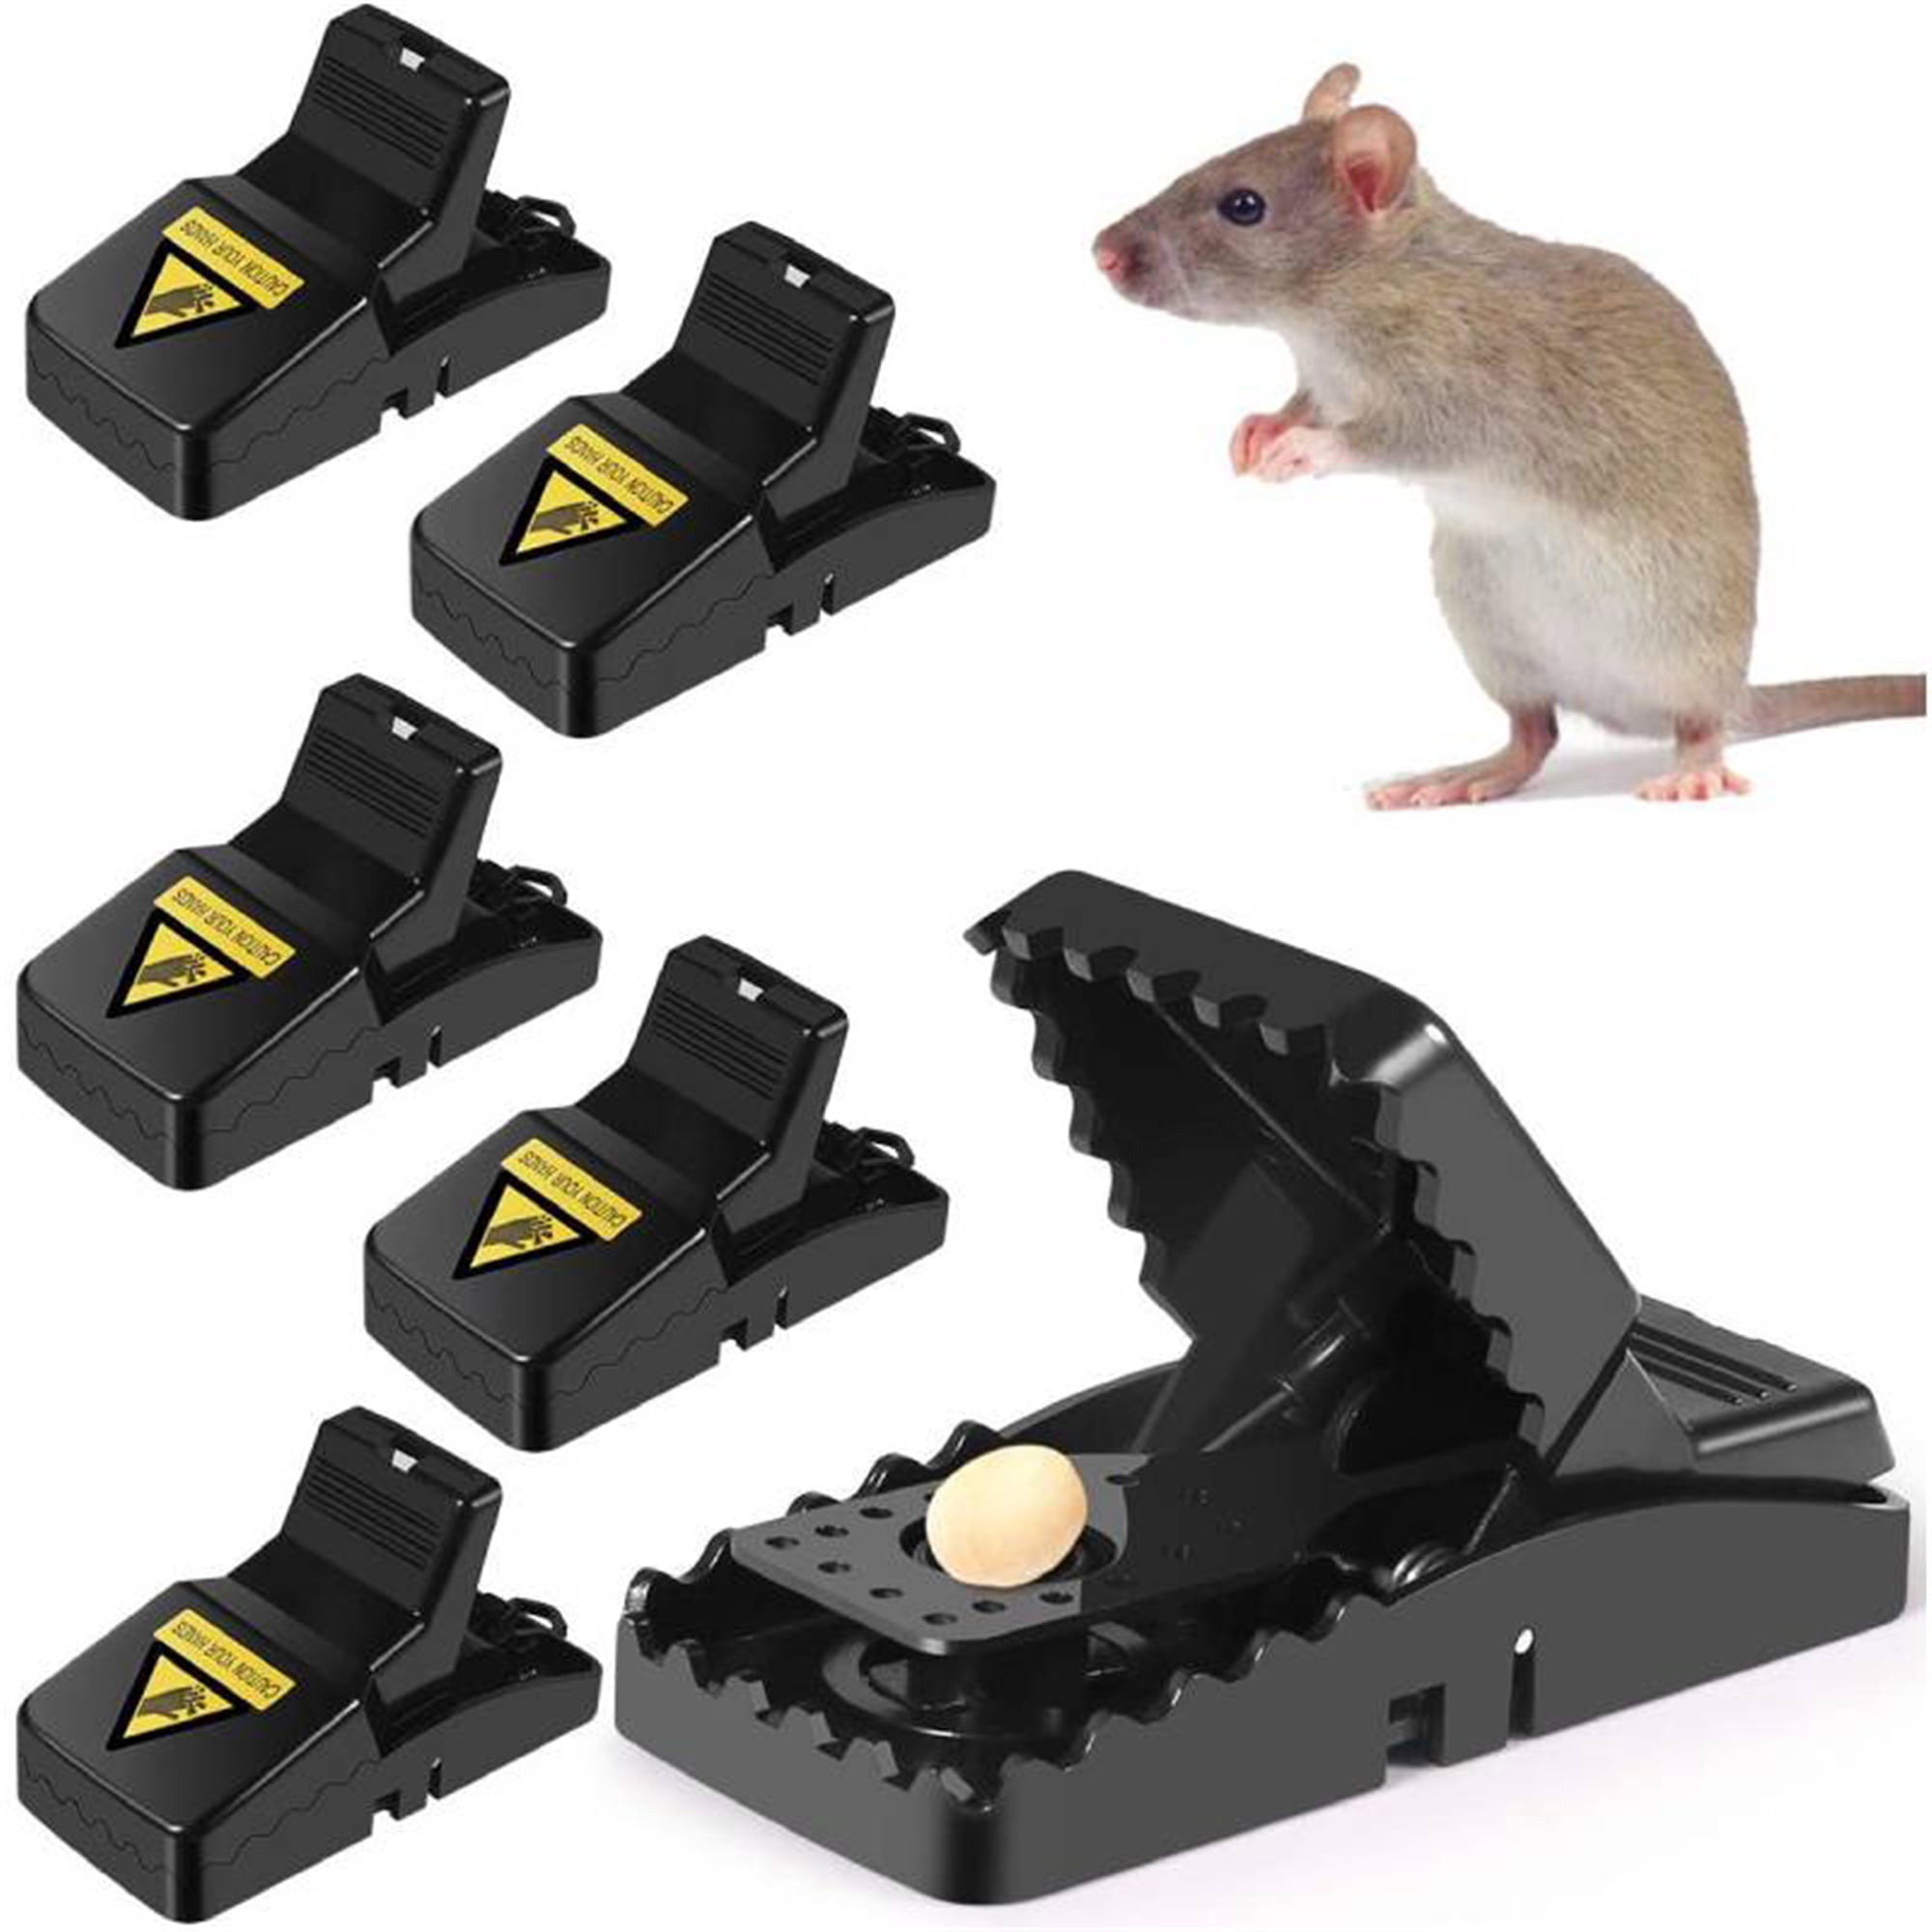  Ortho 0320110 Home Defense MAX Kill Contain Mouse Trap, (Older  Model) : Rodent Traps : Patio, Lawn & Garden